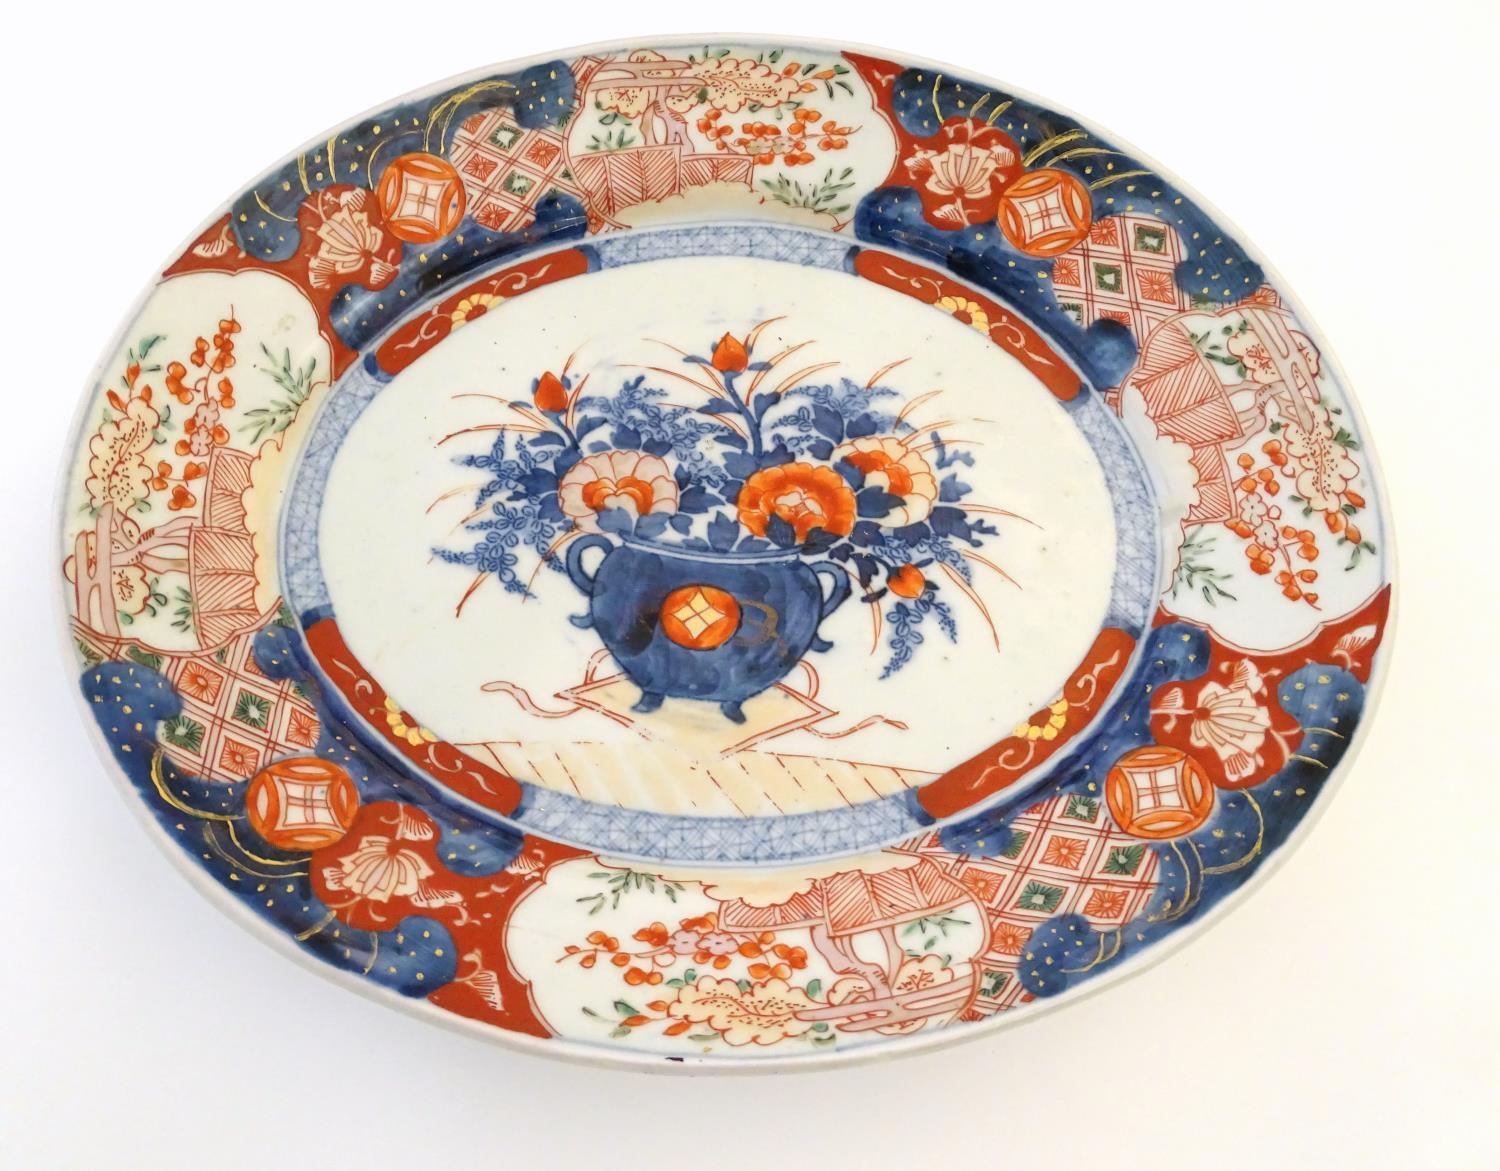 A Japanese Imari style plate, the centre decorated with a vase of flowers with a floral border.